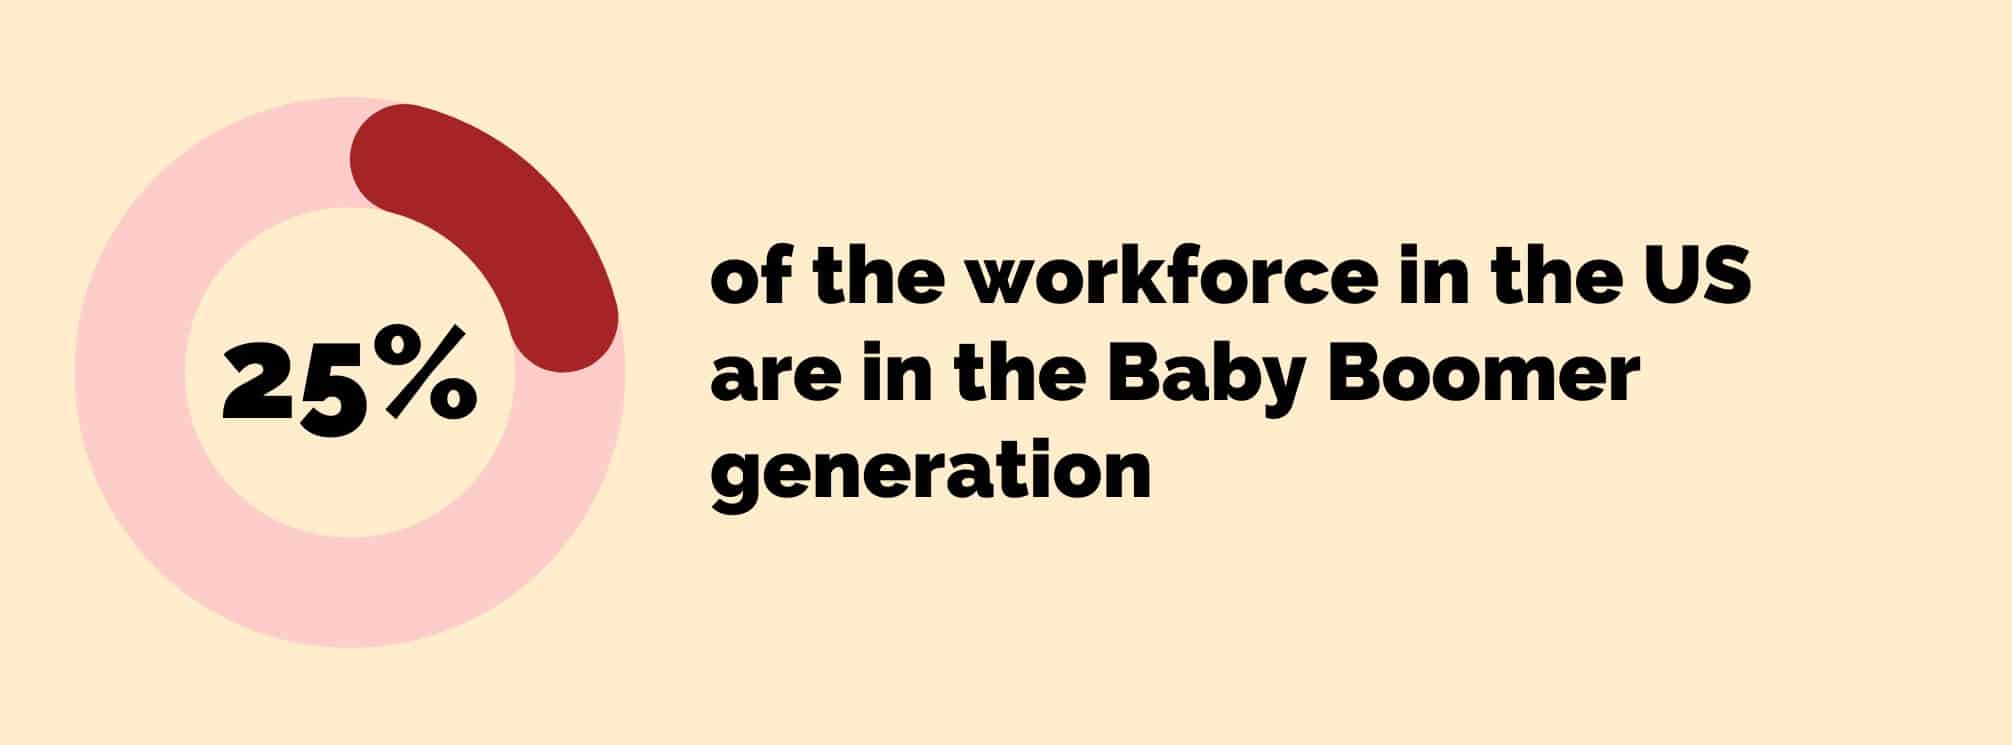 graphic with a statistic graphically and textually represented. It says "25% of the workforce in the US are in the Baby Boomer generation."